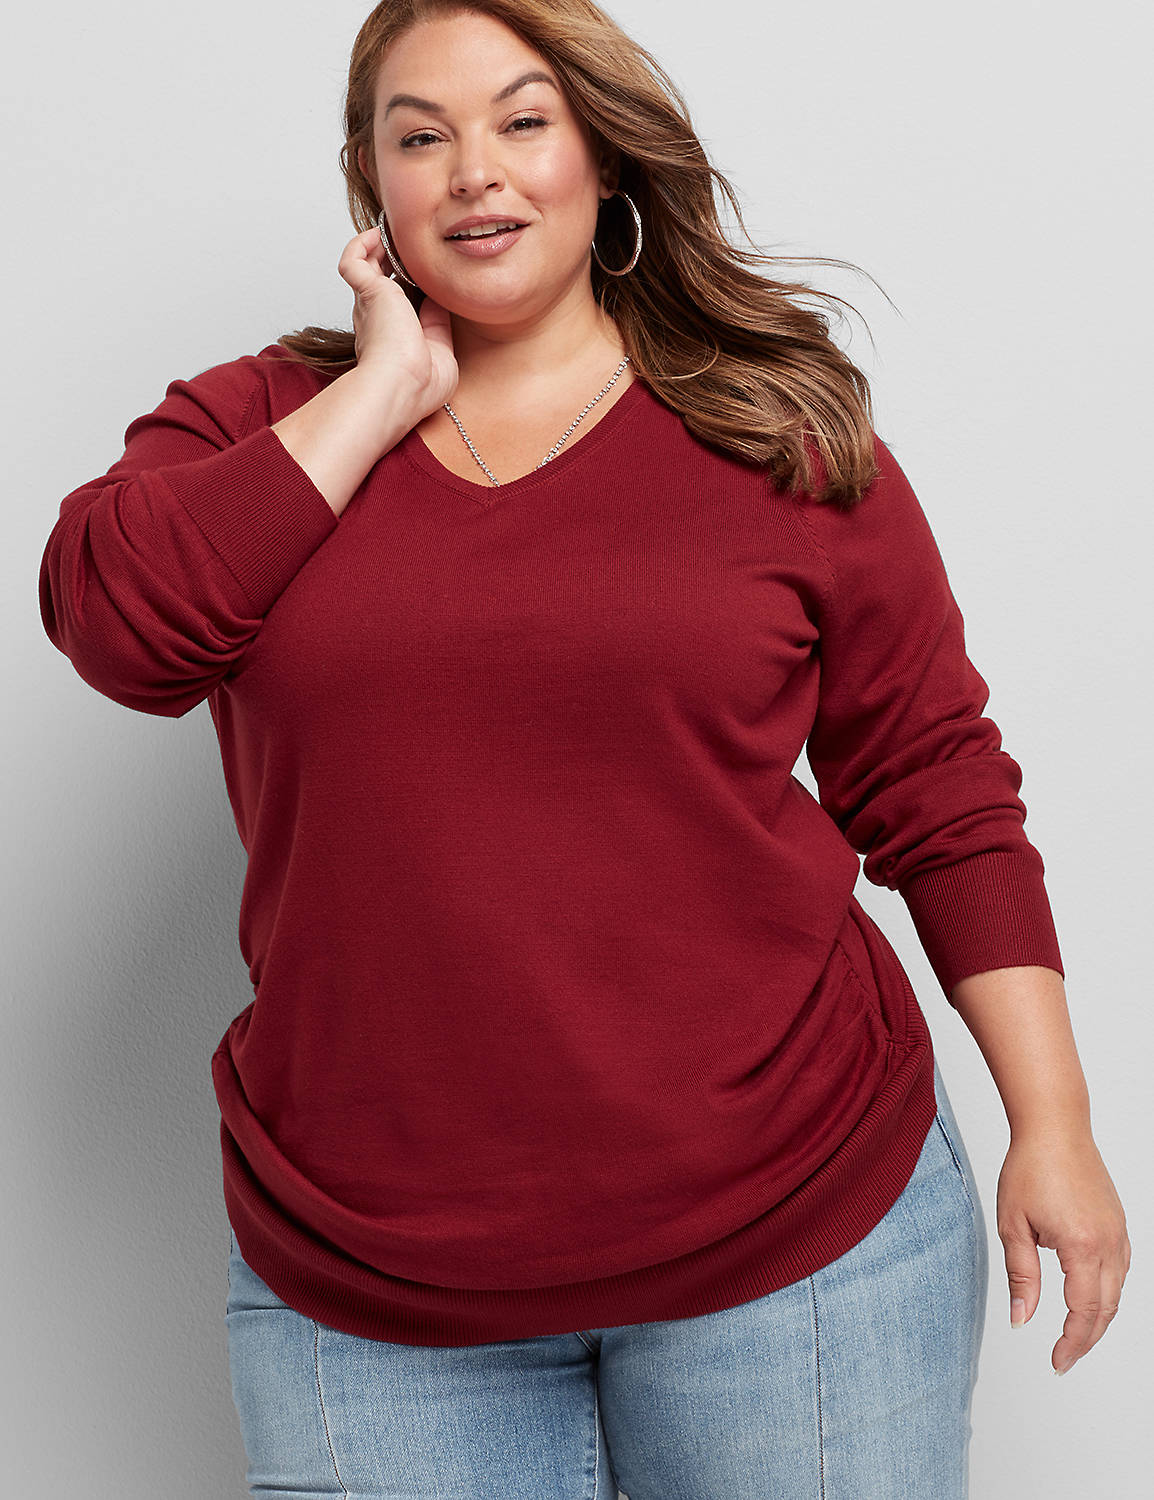 Long Sleeve Vneck Pullover with Shirred Side 1113192:PANTONE Pomegranate:10/12 Product Image 1